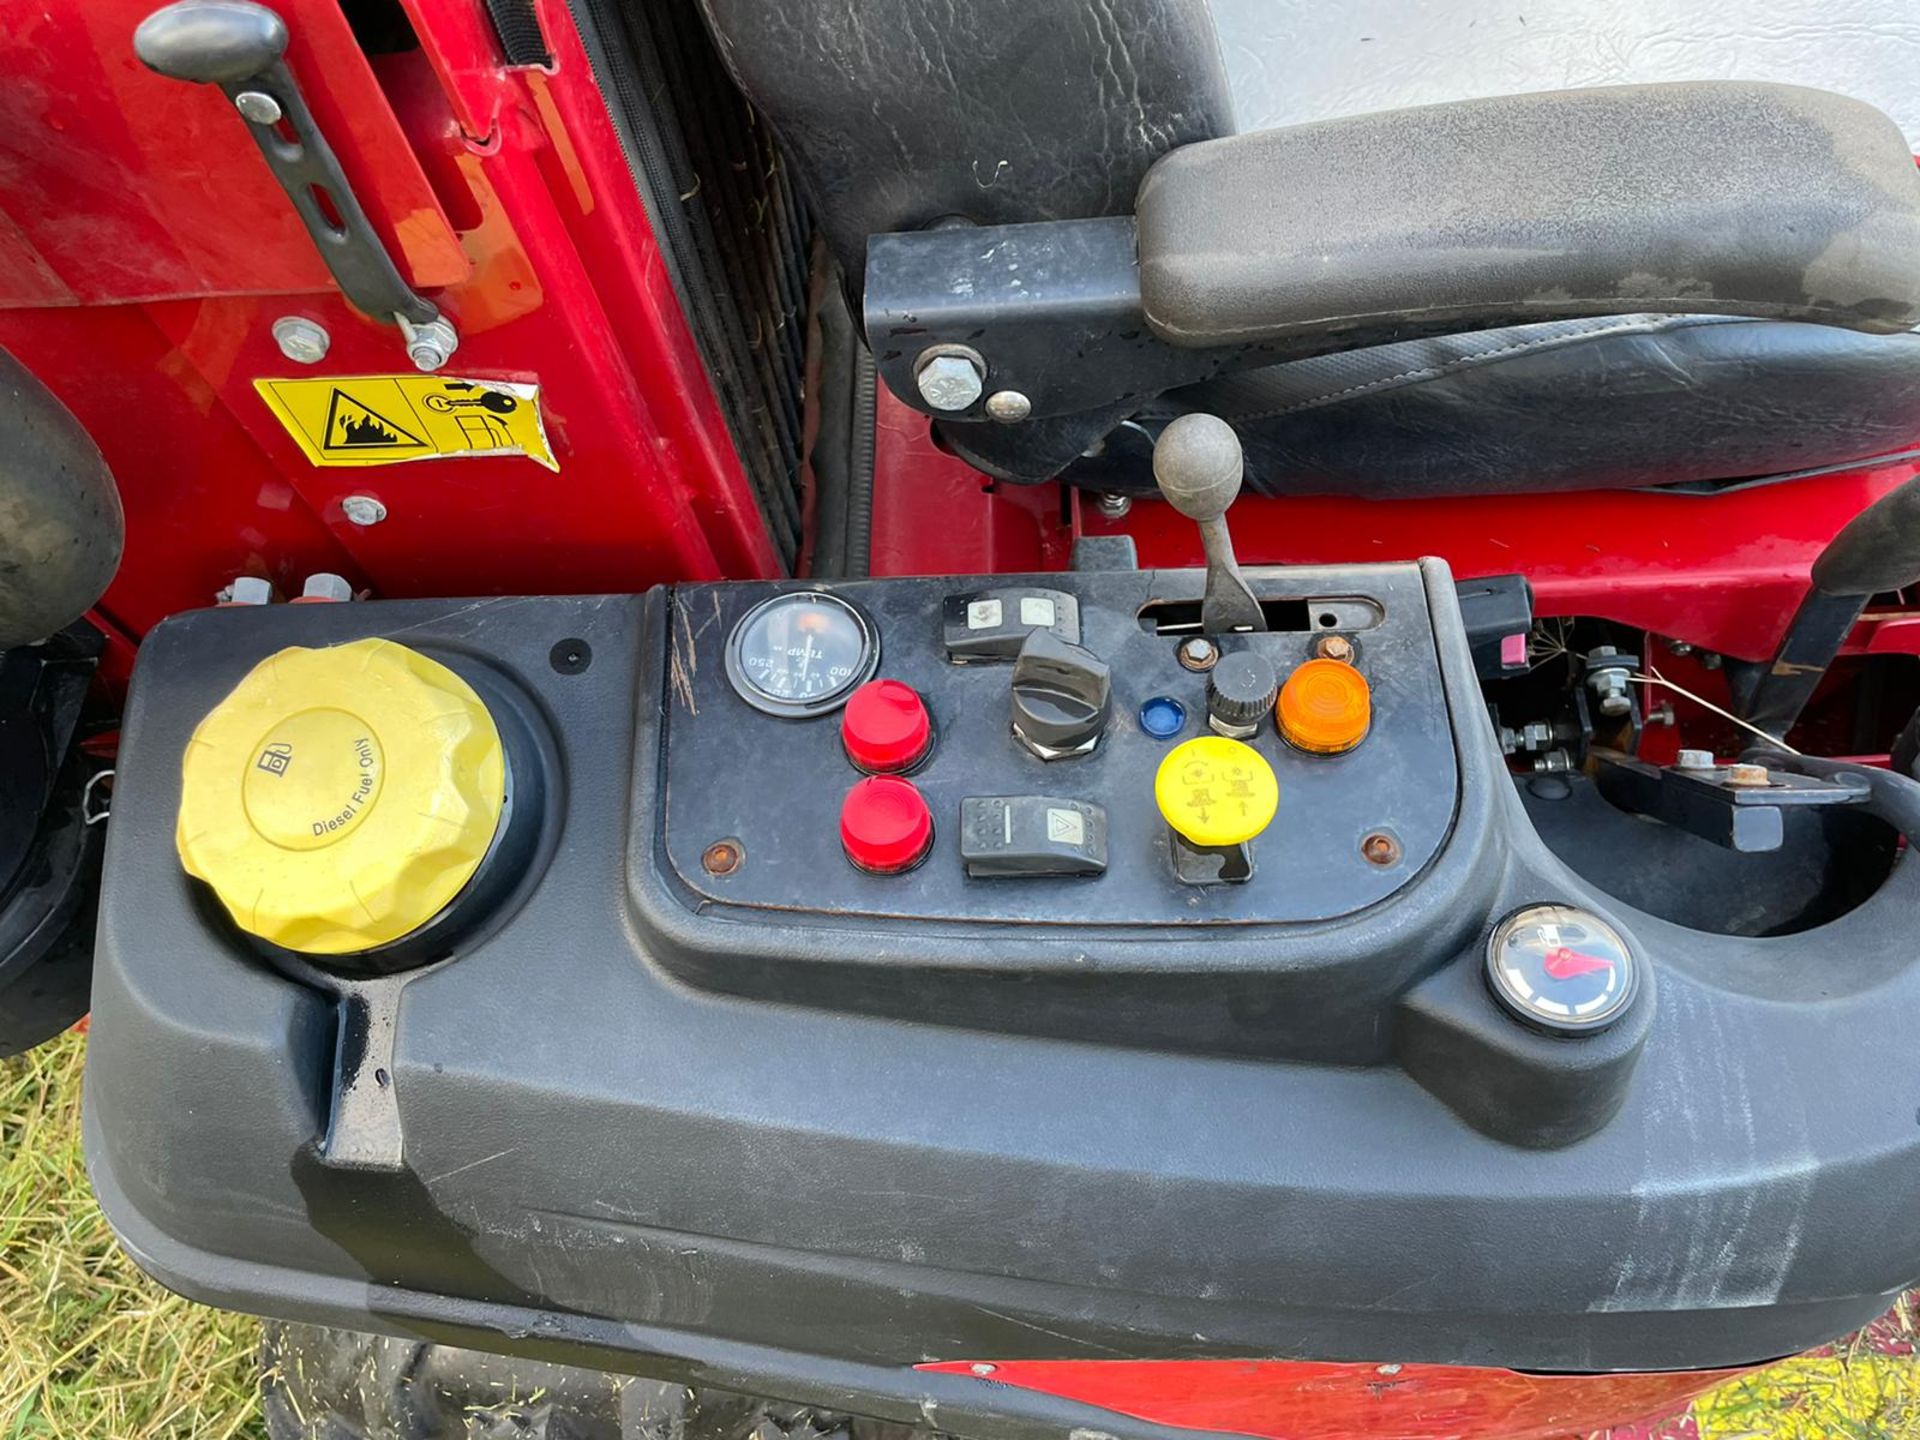 2012 FERRIS IS2500Z ZERO TURN MOWER, RUNS DRIVES AND CUTS WELL, ROAD REGISTERED, ROLL BAR *PLUS VAT* - Image 10 of 10